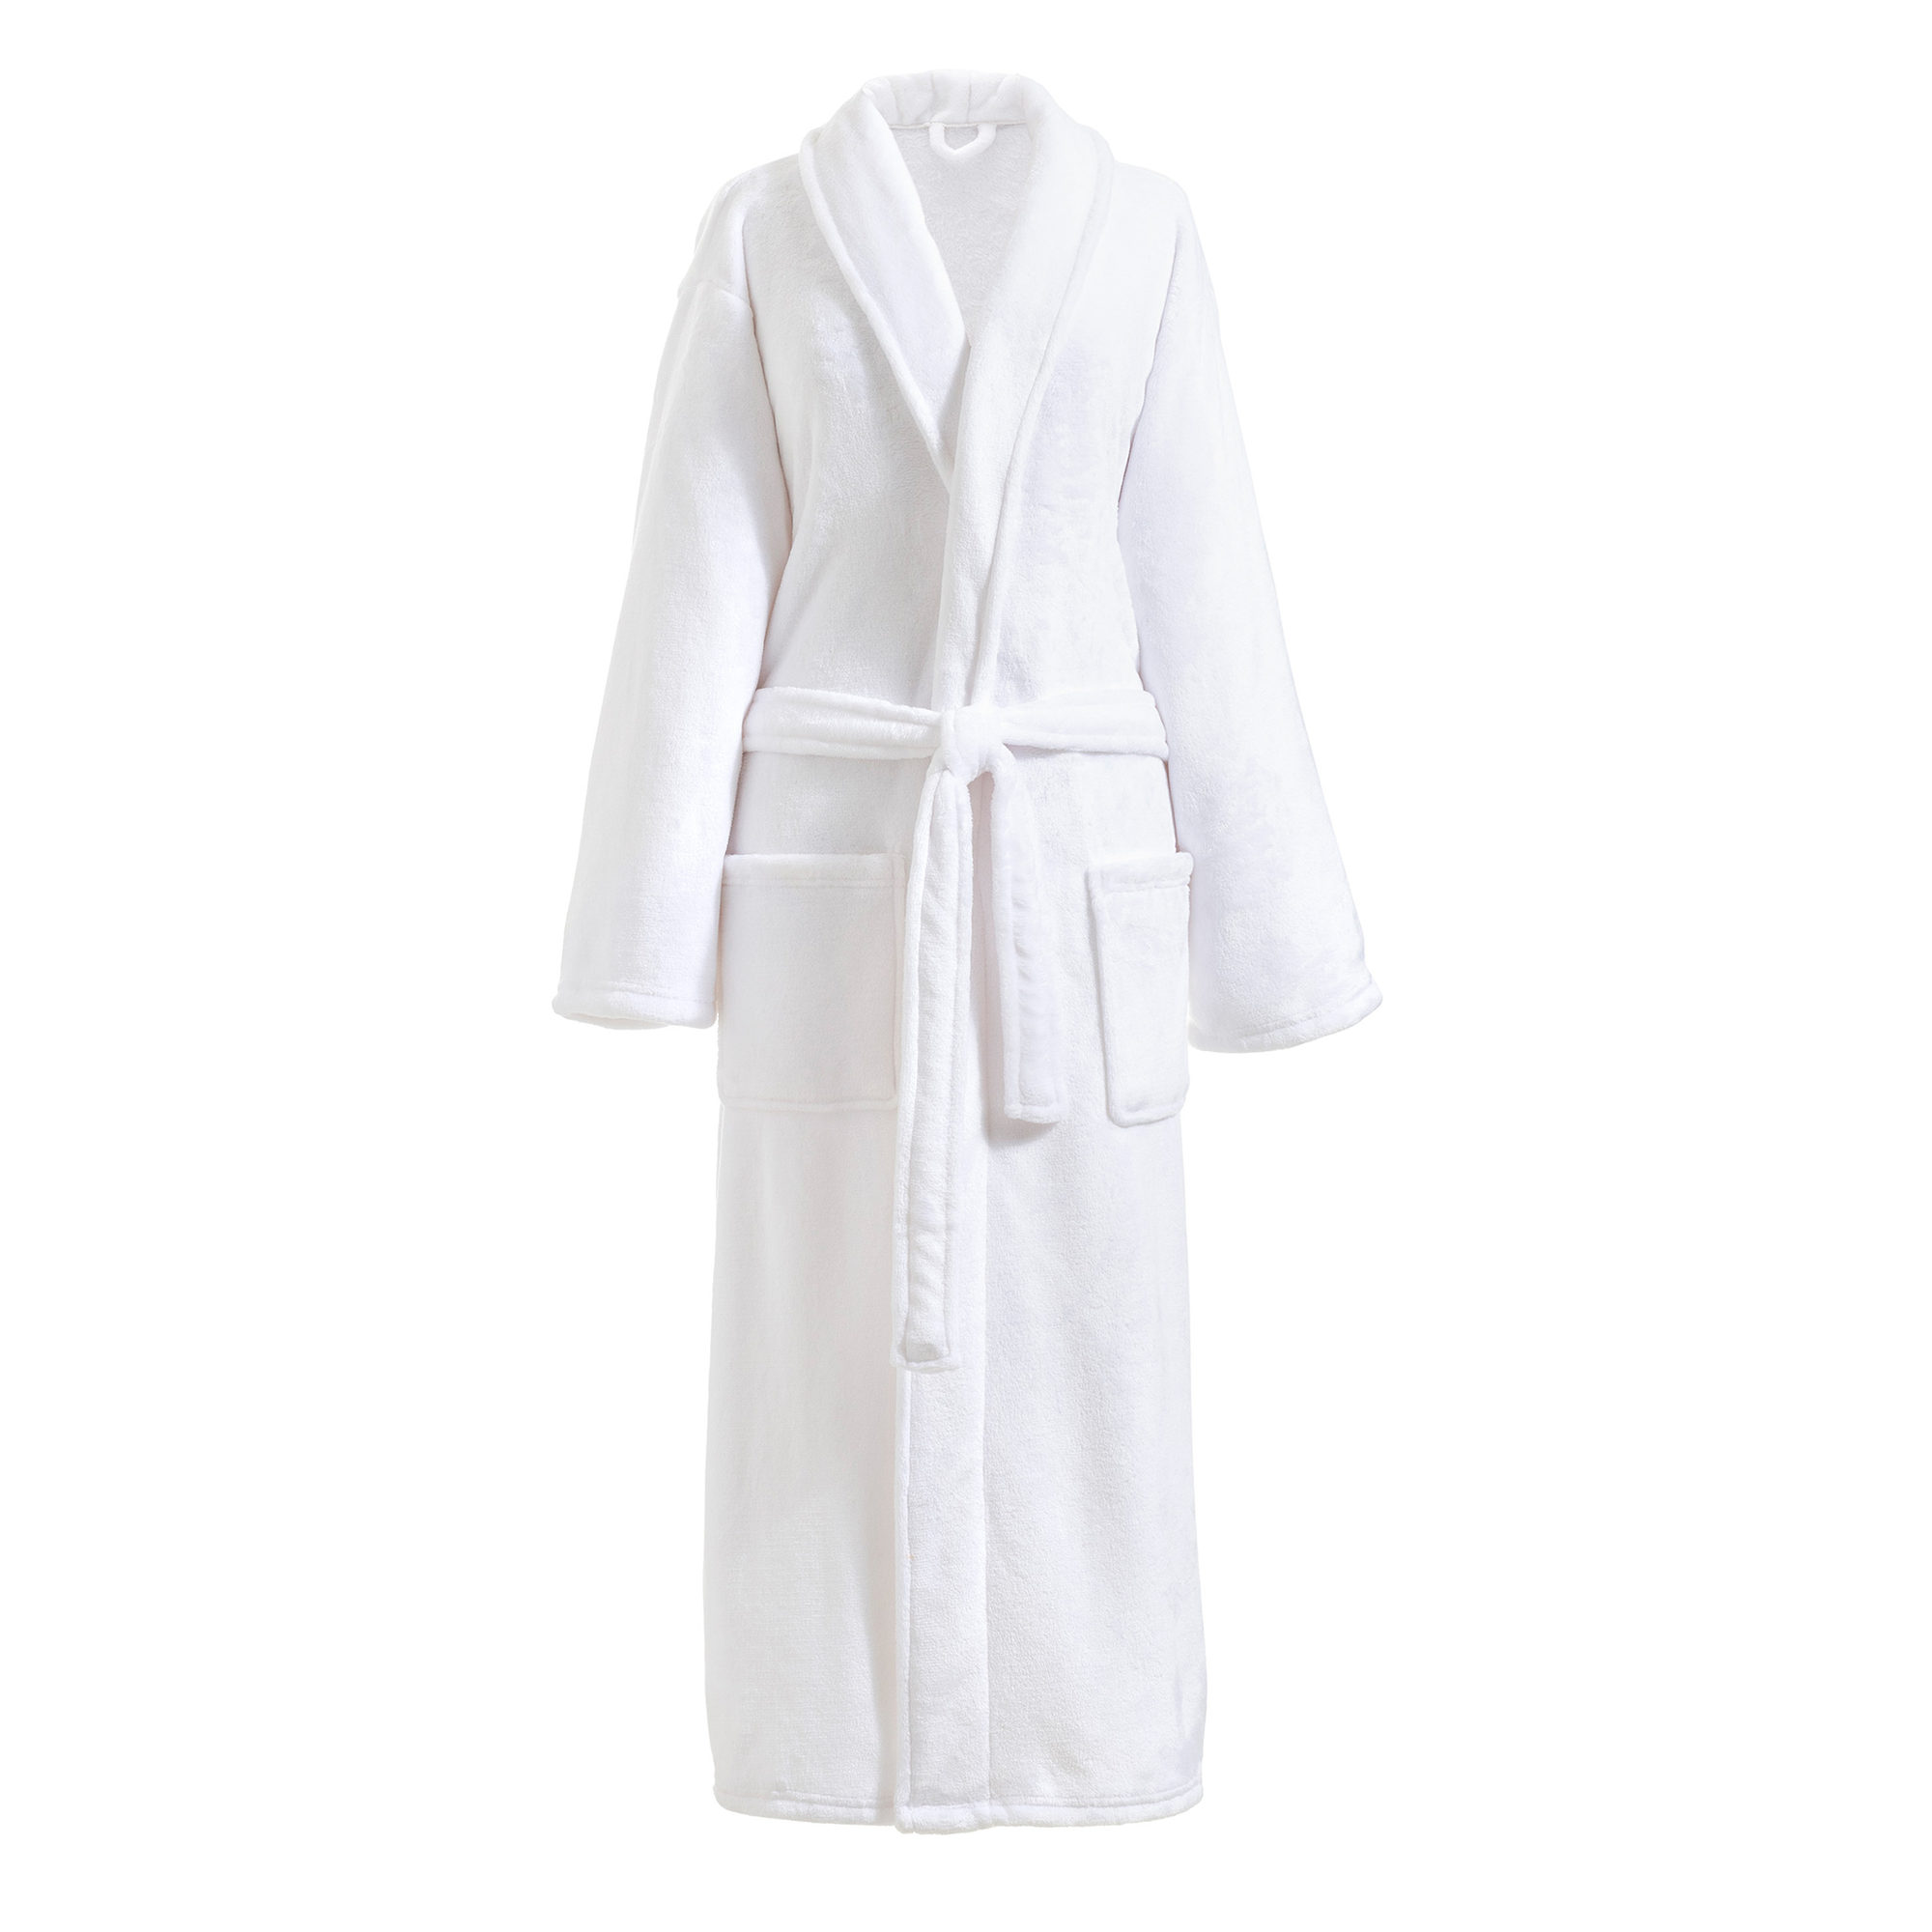 Whole Image of Pine Cone Hill Sheepy Fleece 2.0 Robe in White Color